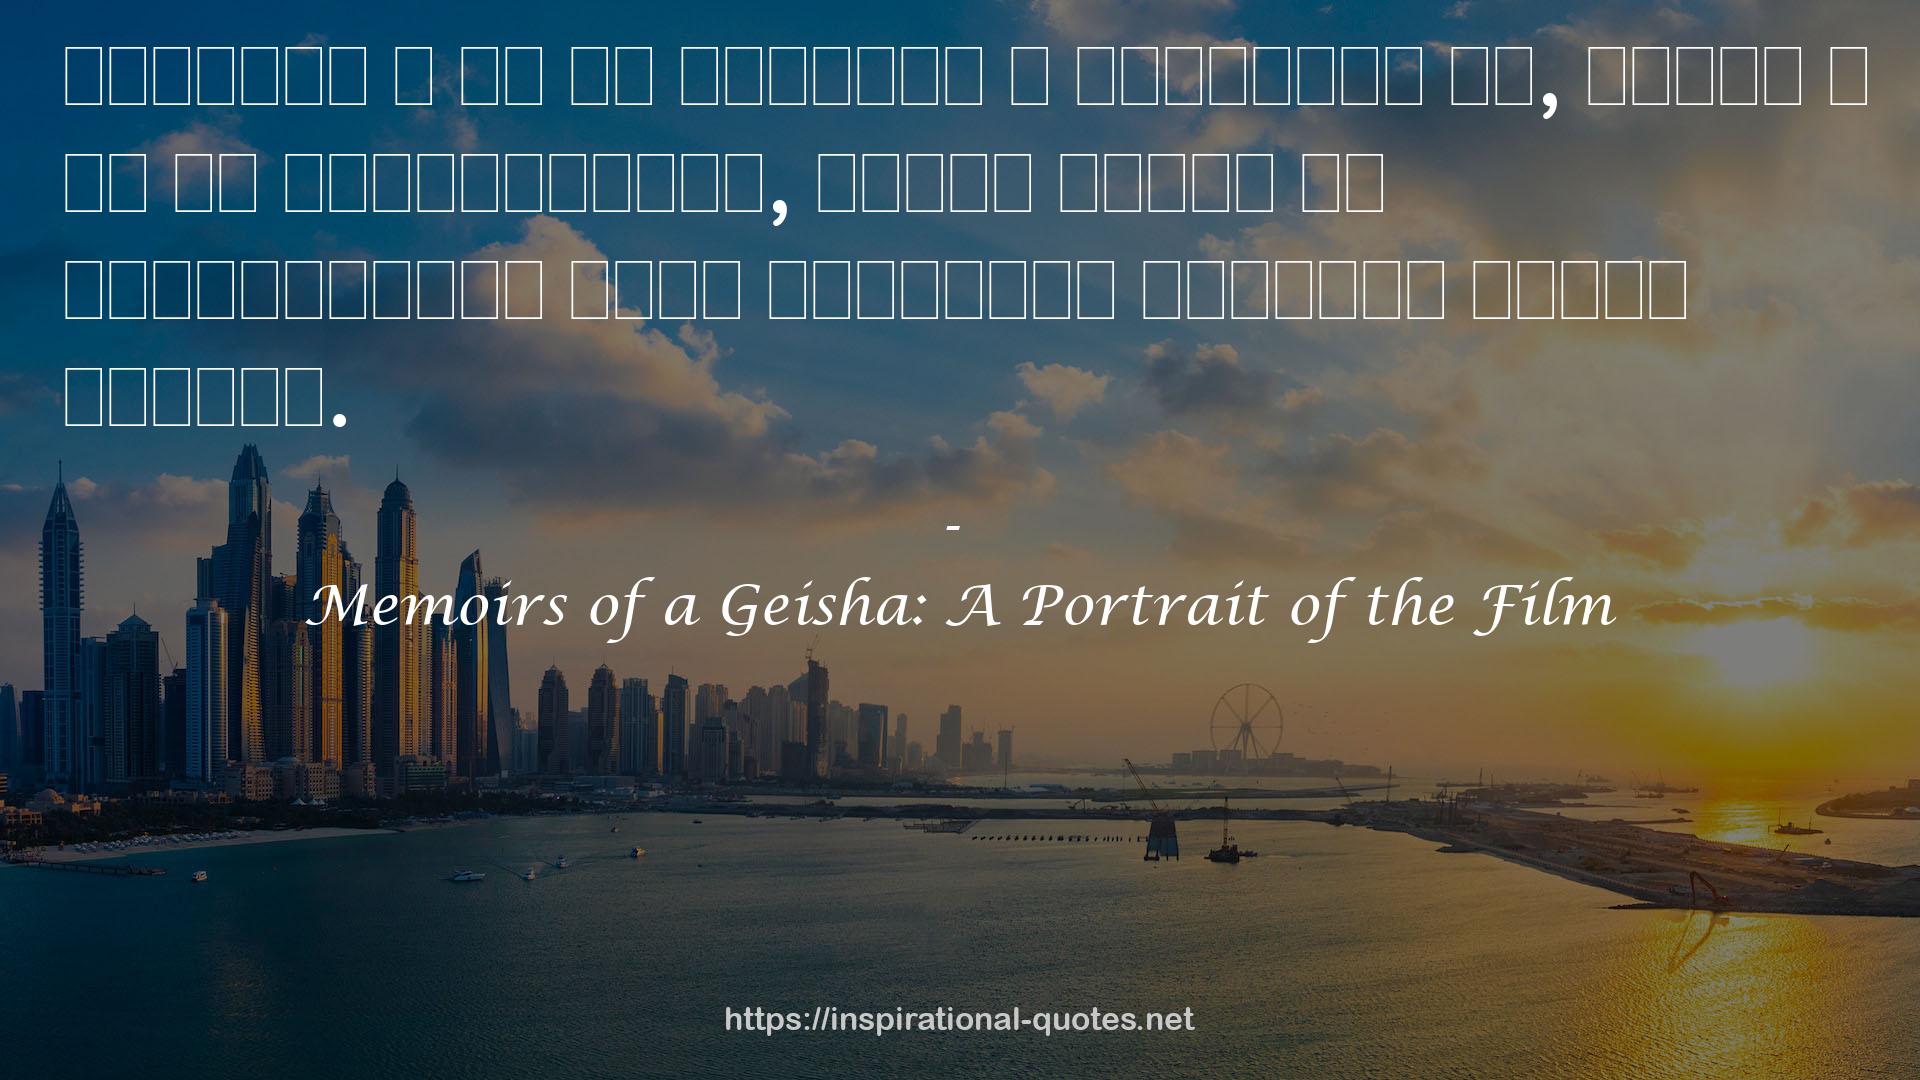 Memoirs of a Geisha: A Portrait of the Film QUOTES